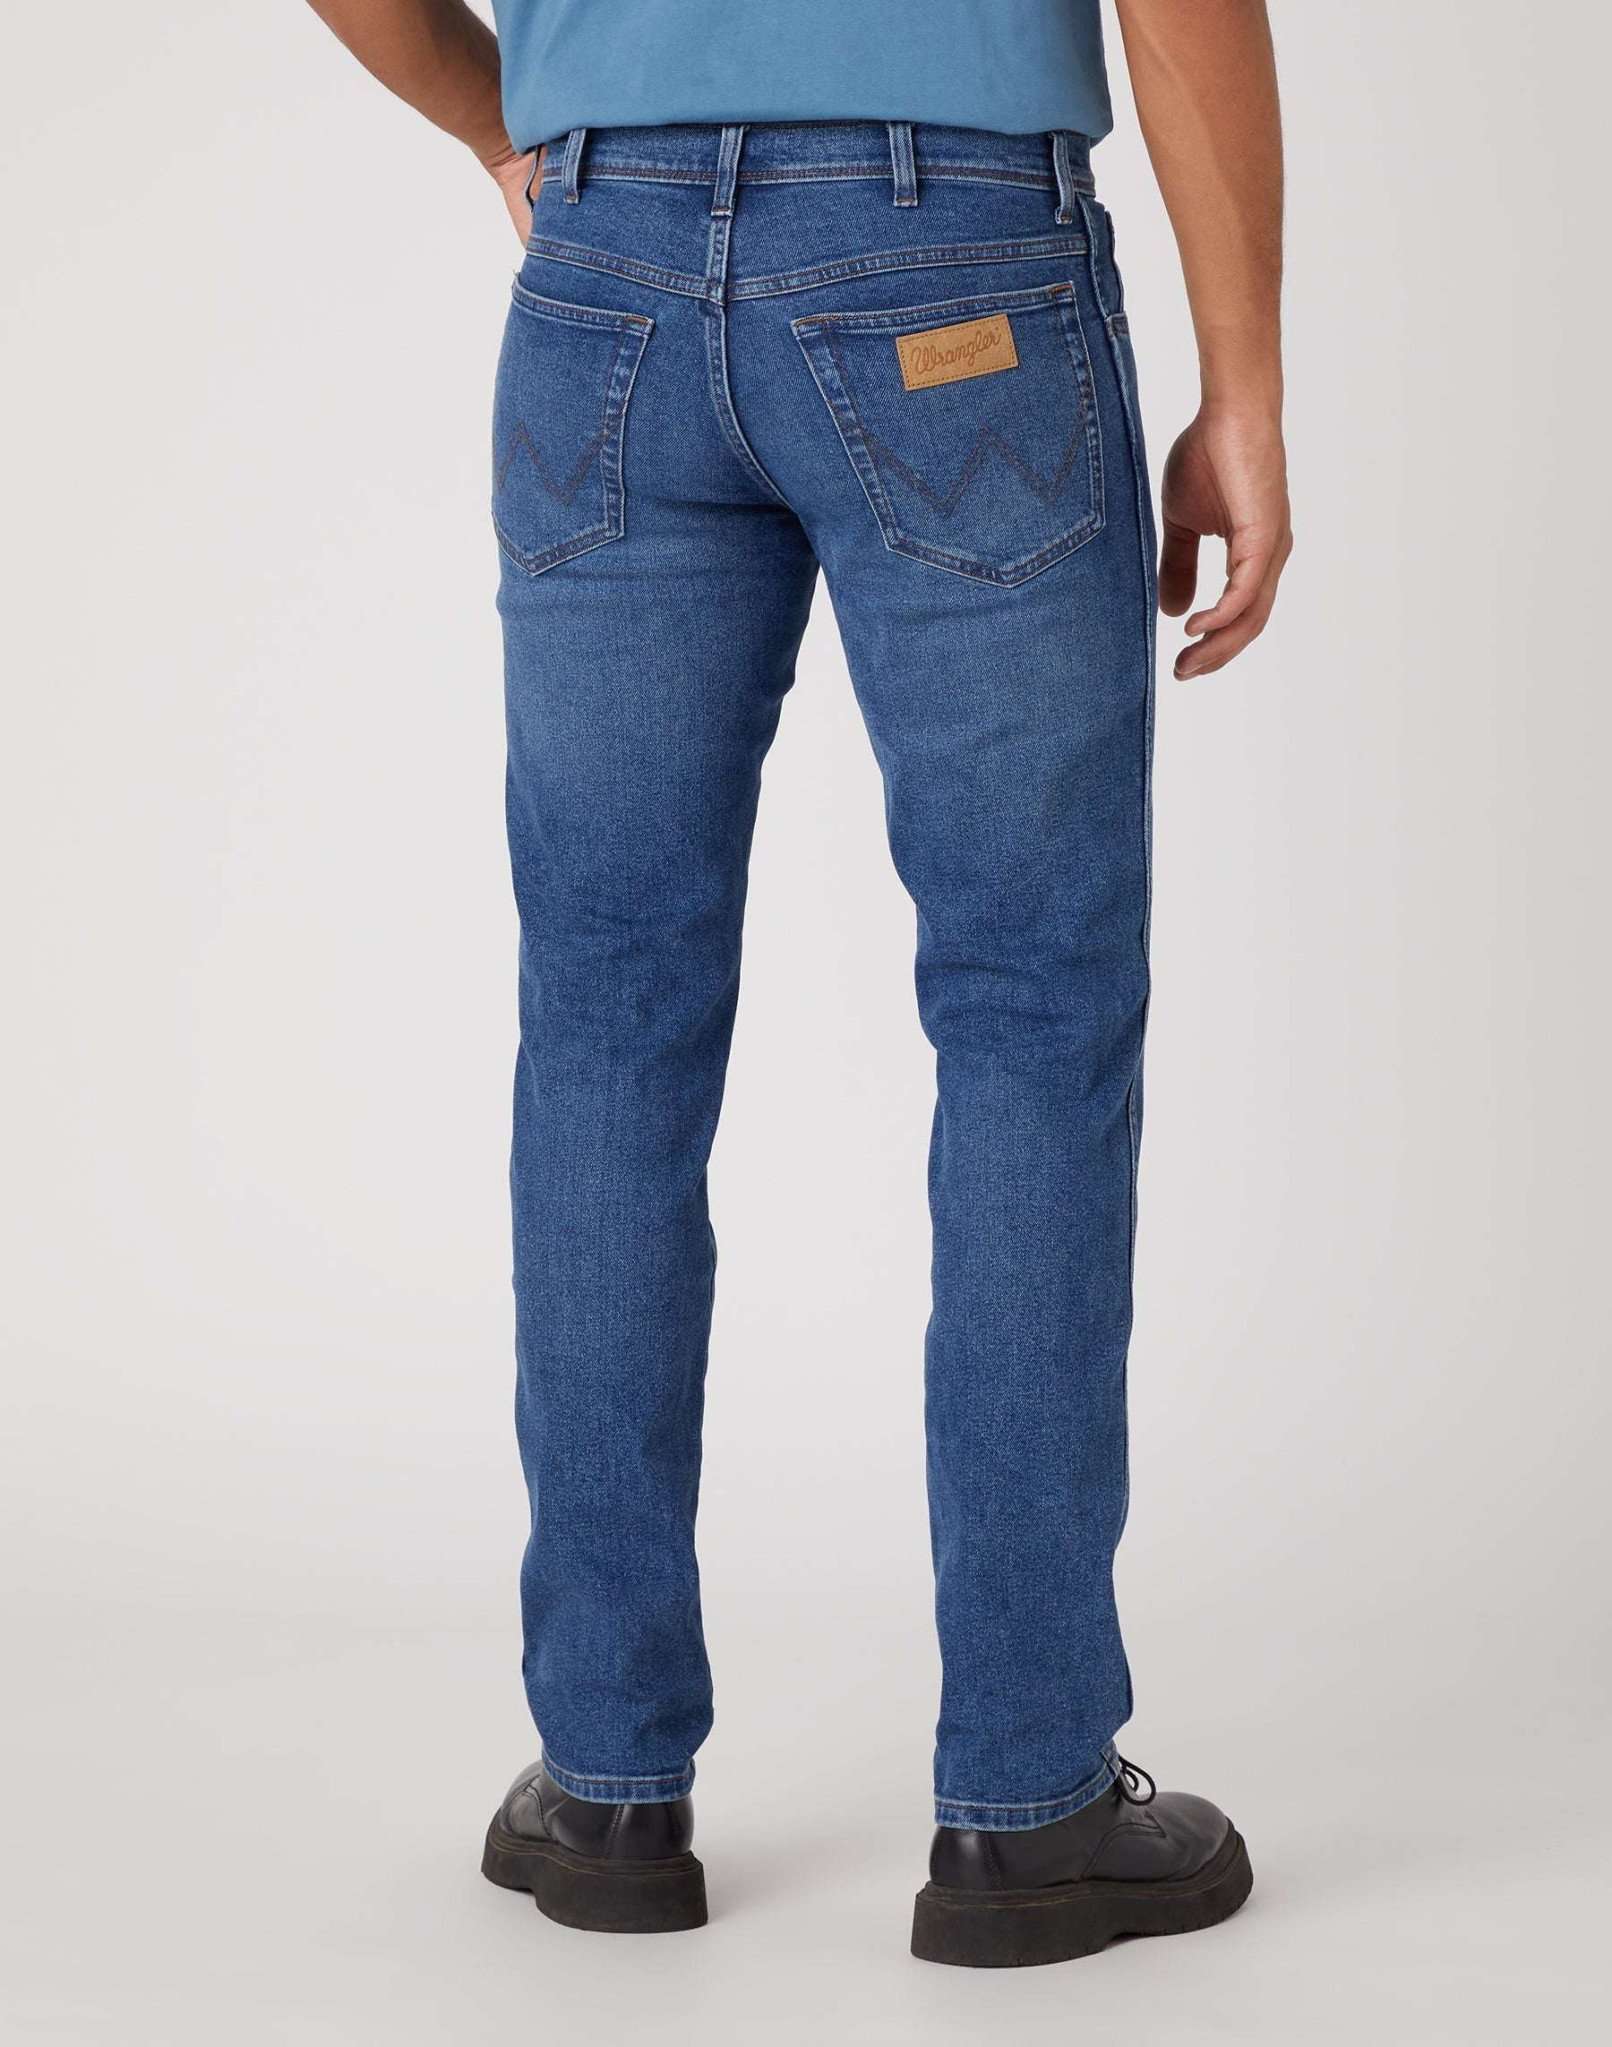 Texas Slim Low Stretch in Cool Shade Jeans Wrangler   